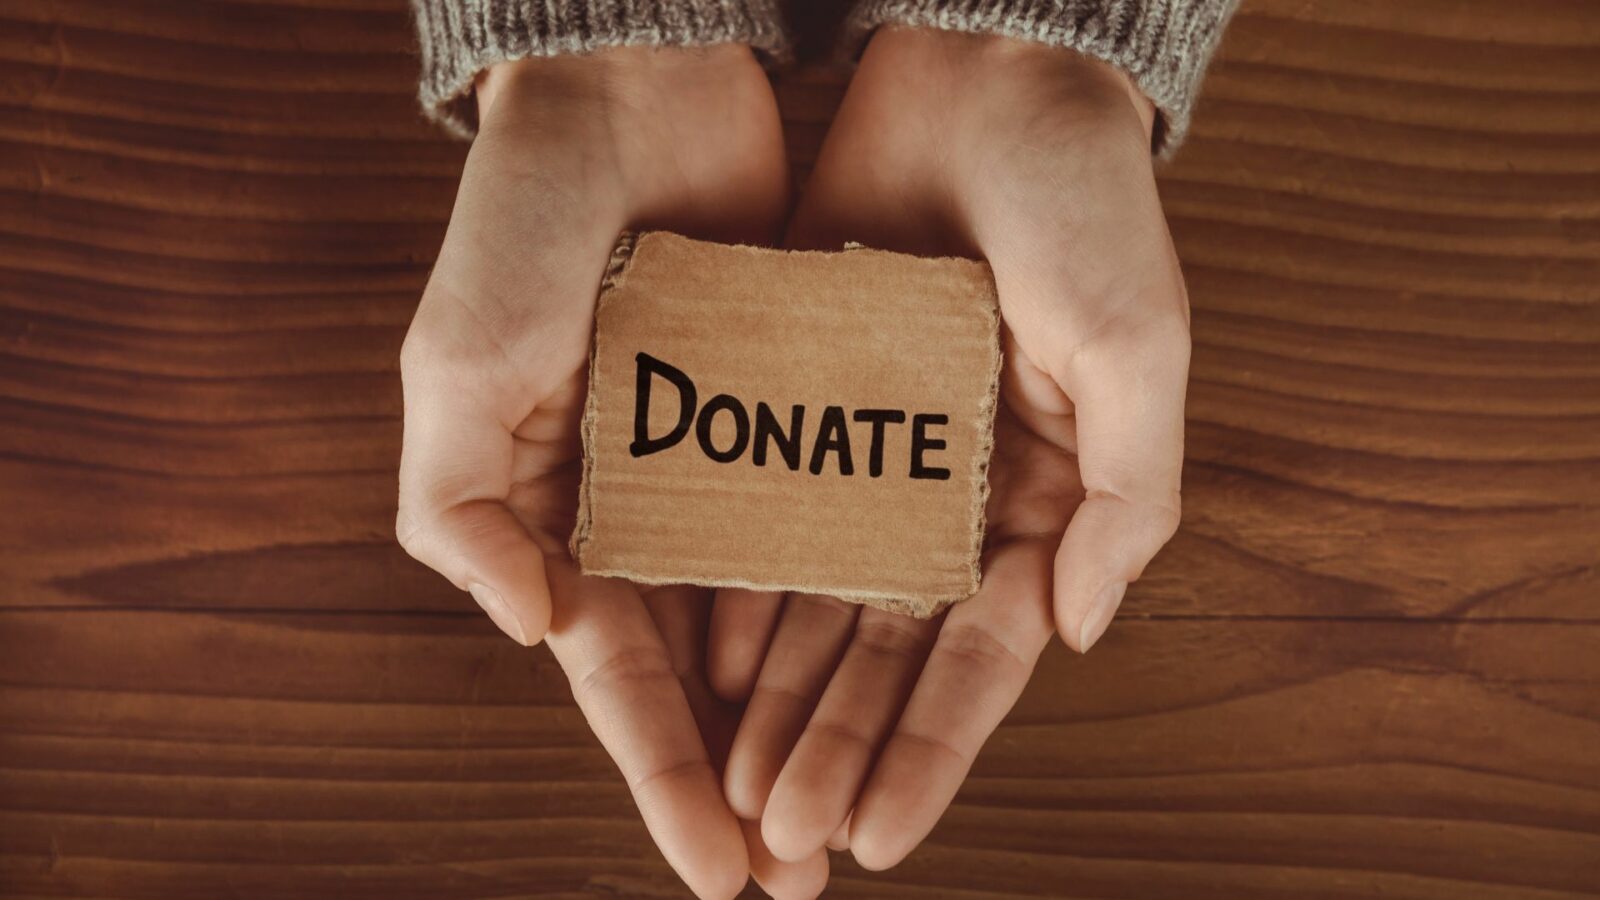 donate as an alternative to a storage unit